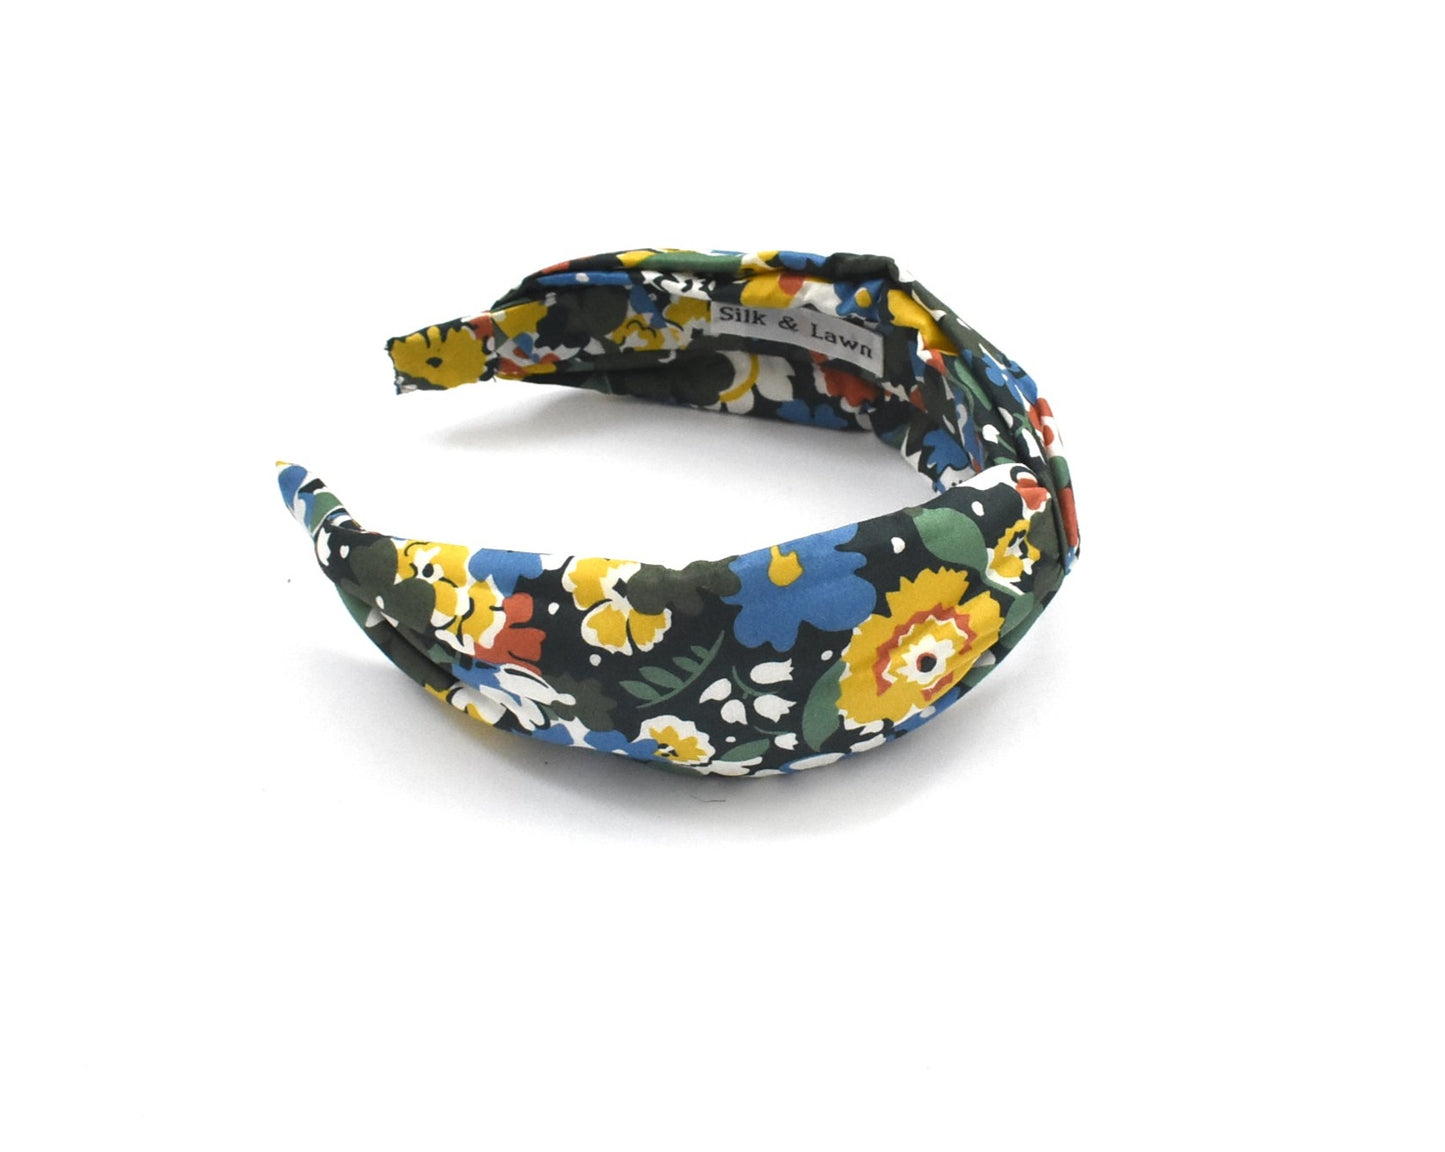 Twisted Alice Headband - Liberty of London Green Floral print